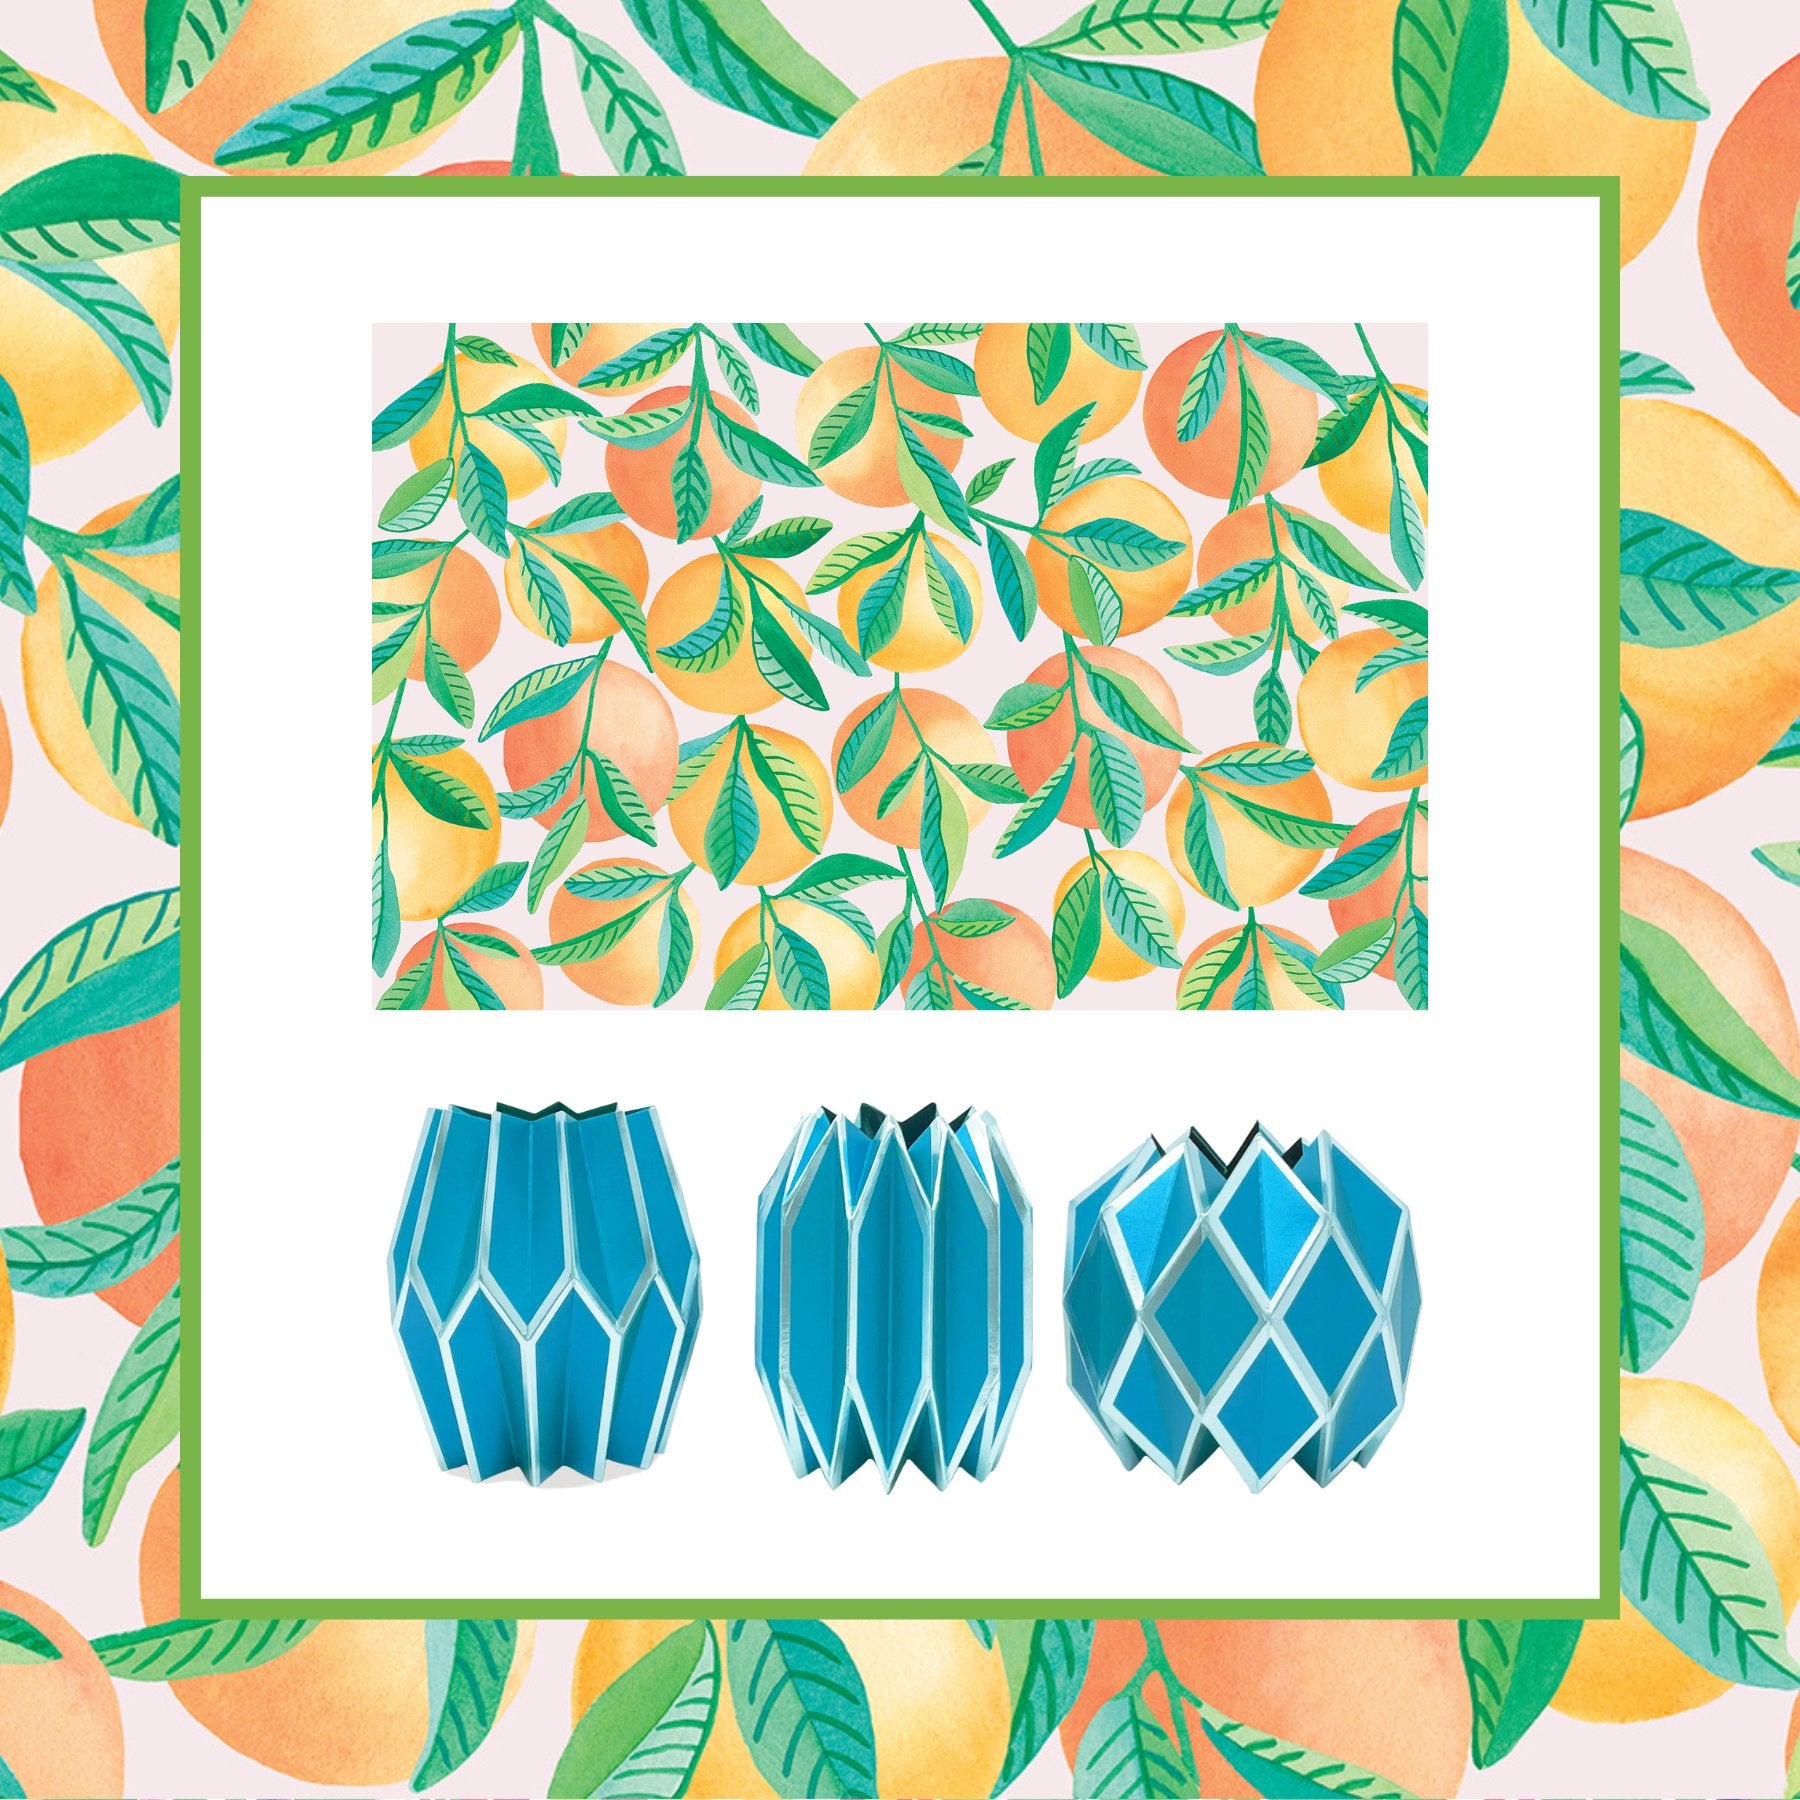 Bundle of orange patterned paper placemats and bright blue paper sleeve vases